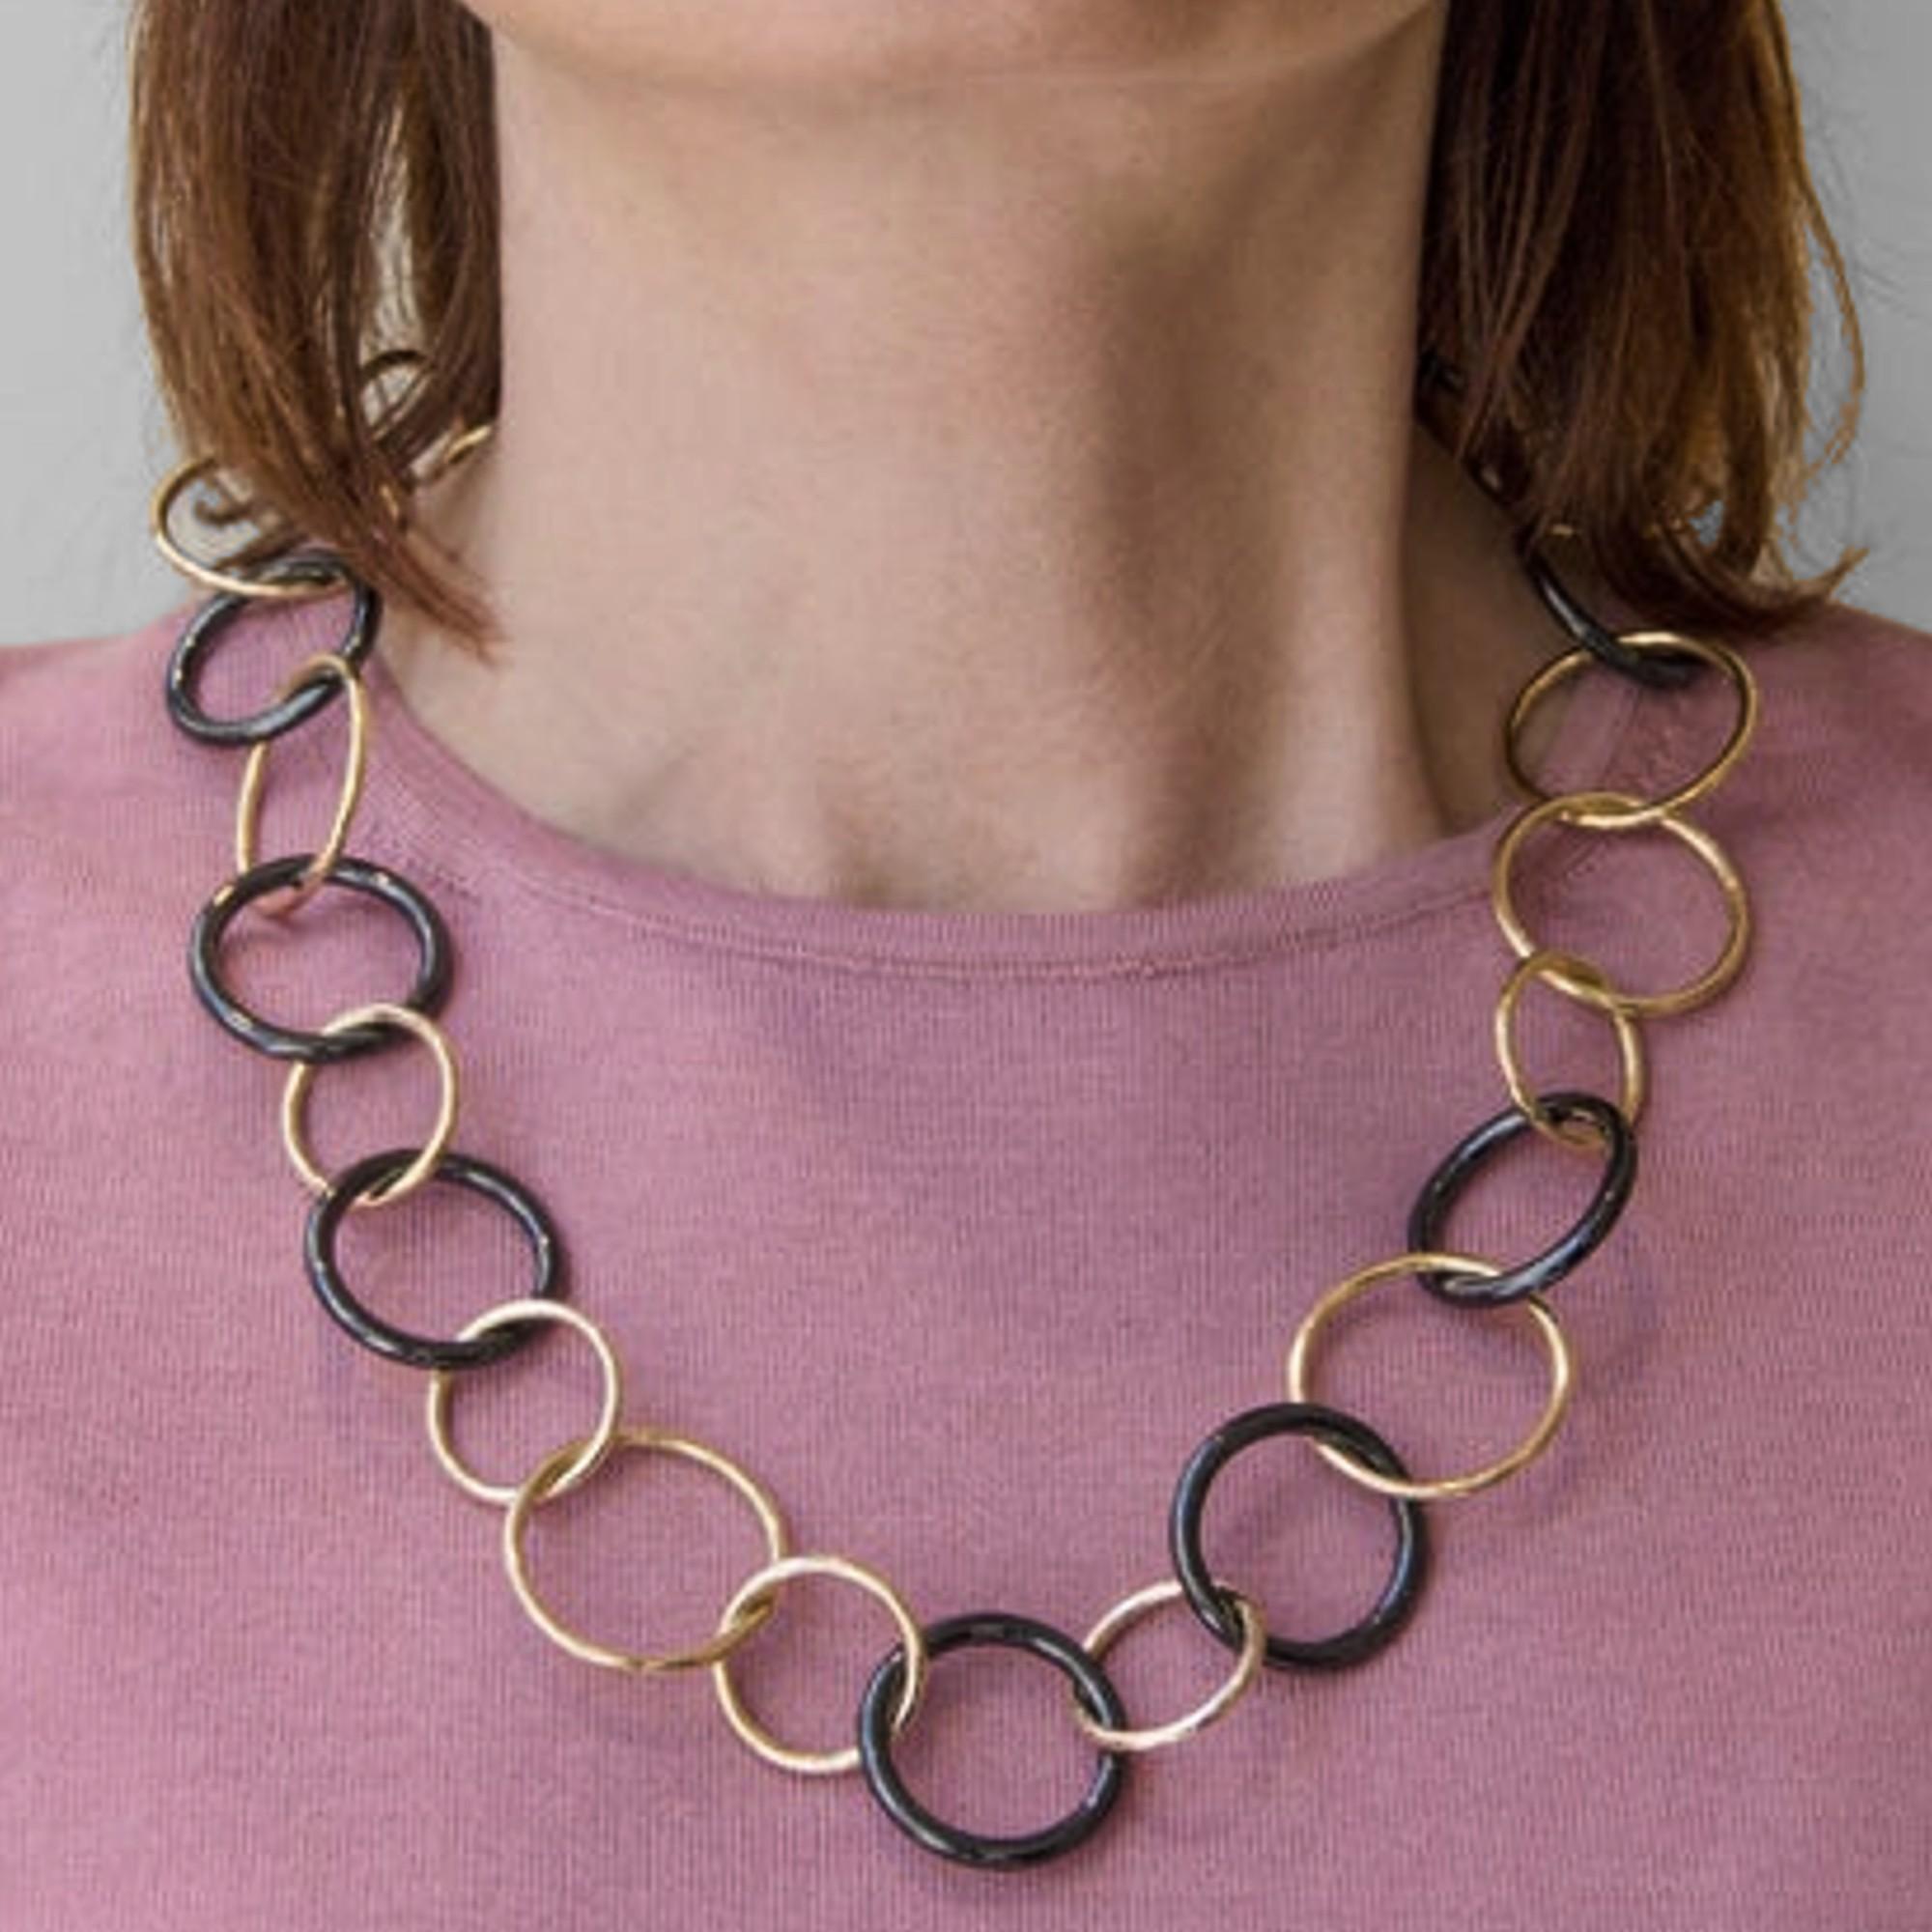 Alex Jona design collection, hand crafted alternating 18k yellow gold and black high-tech ceramic circle chain link necklace. 
Dimension : L 23.43 in / 59 cm 
Diameter  from 0.93in to 1.93in / From 2.36cm in to 4.9cm
With a hardness approaching that